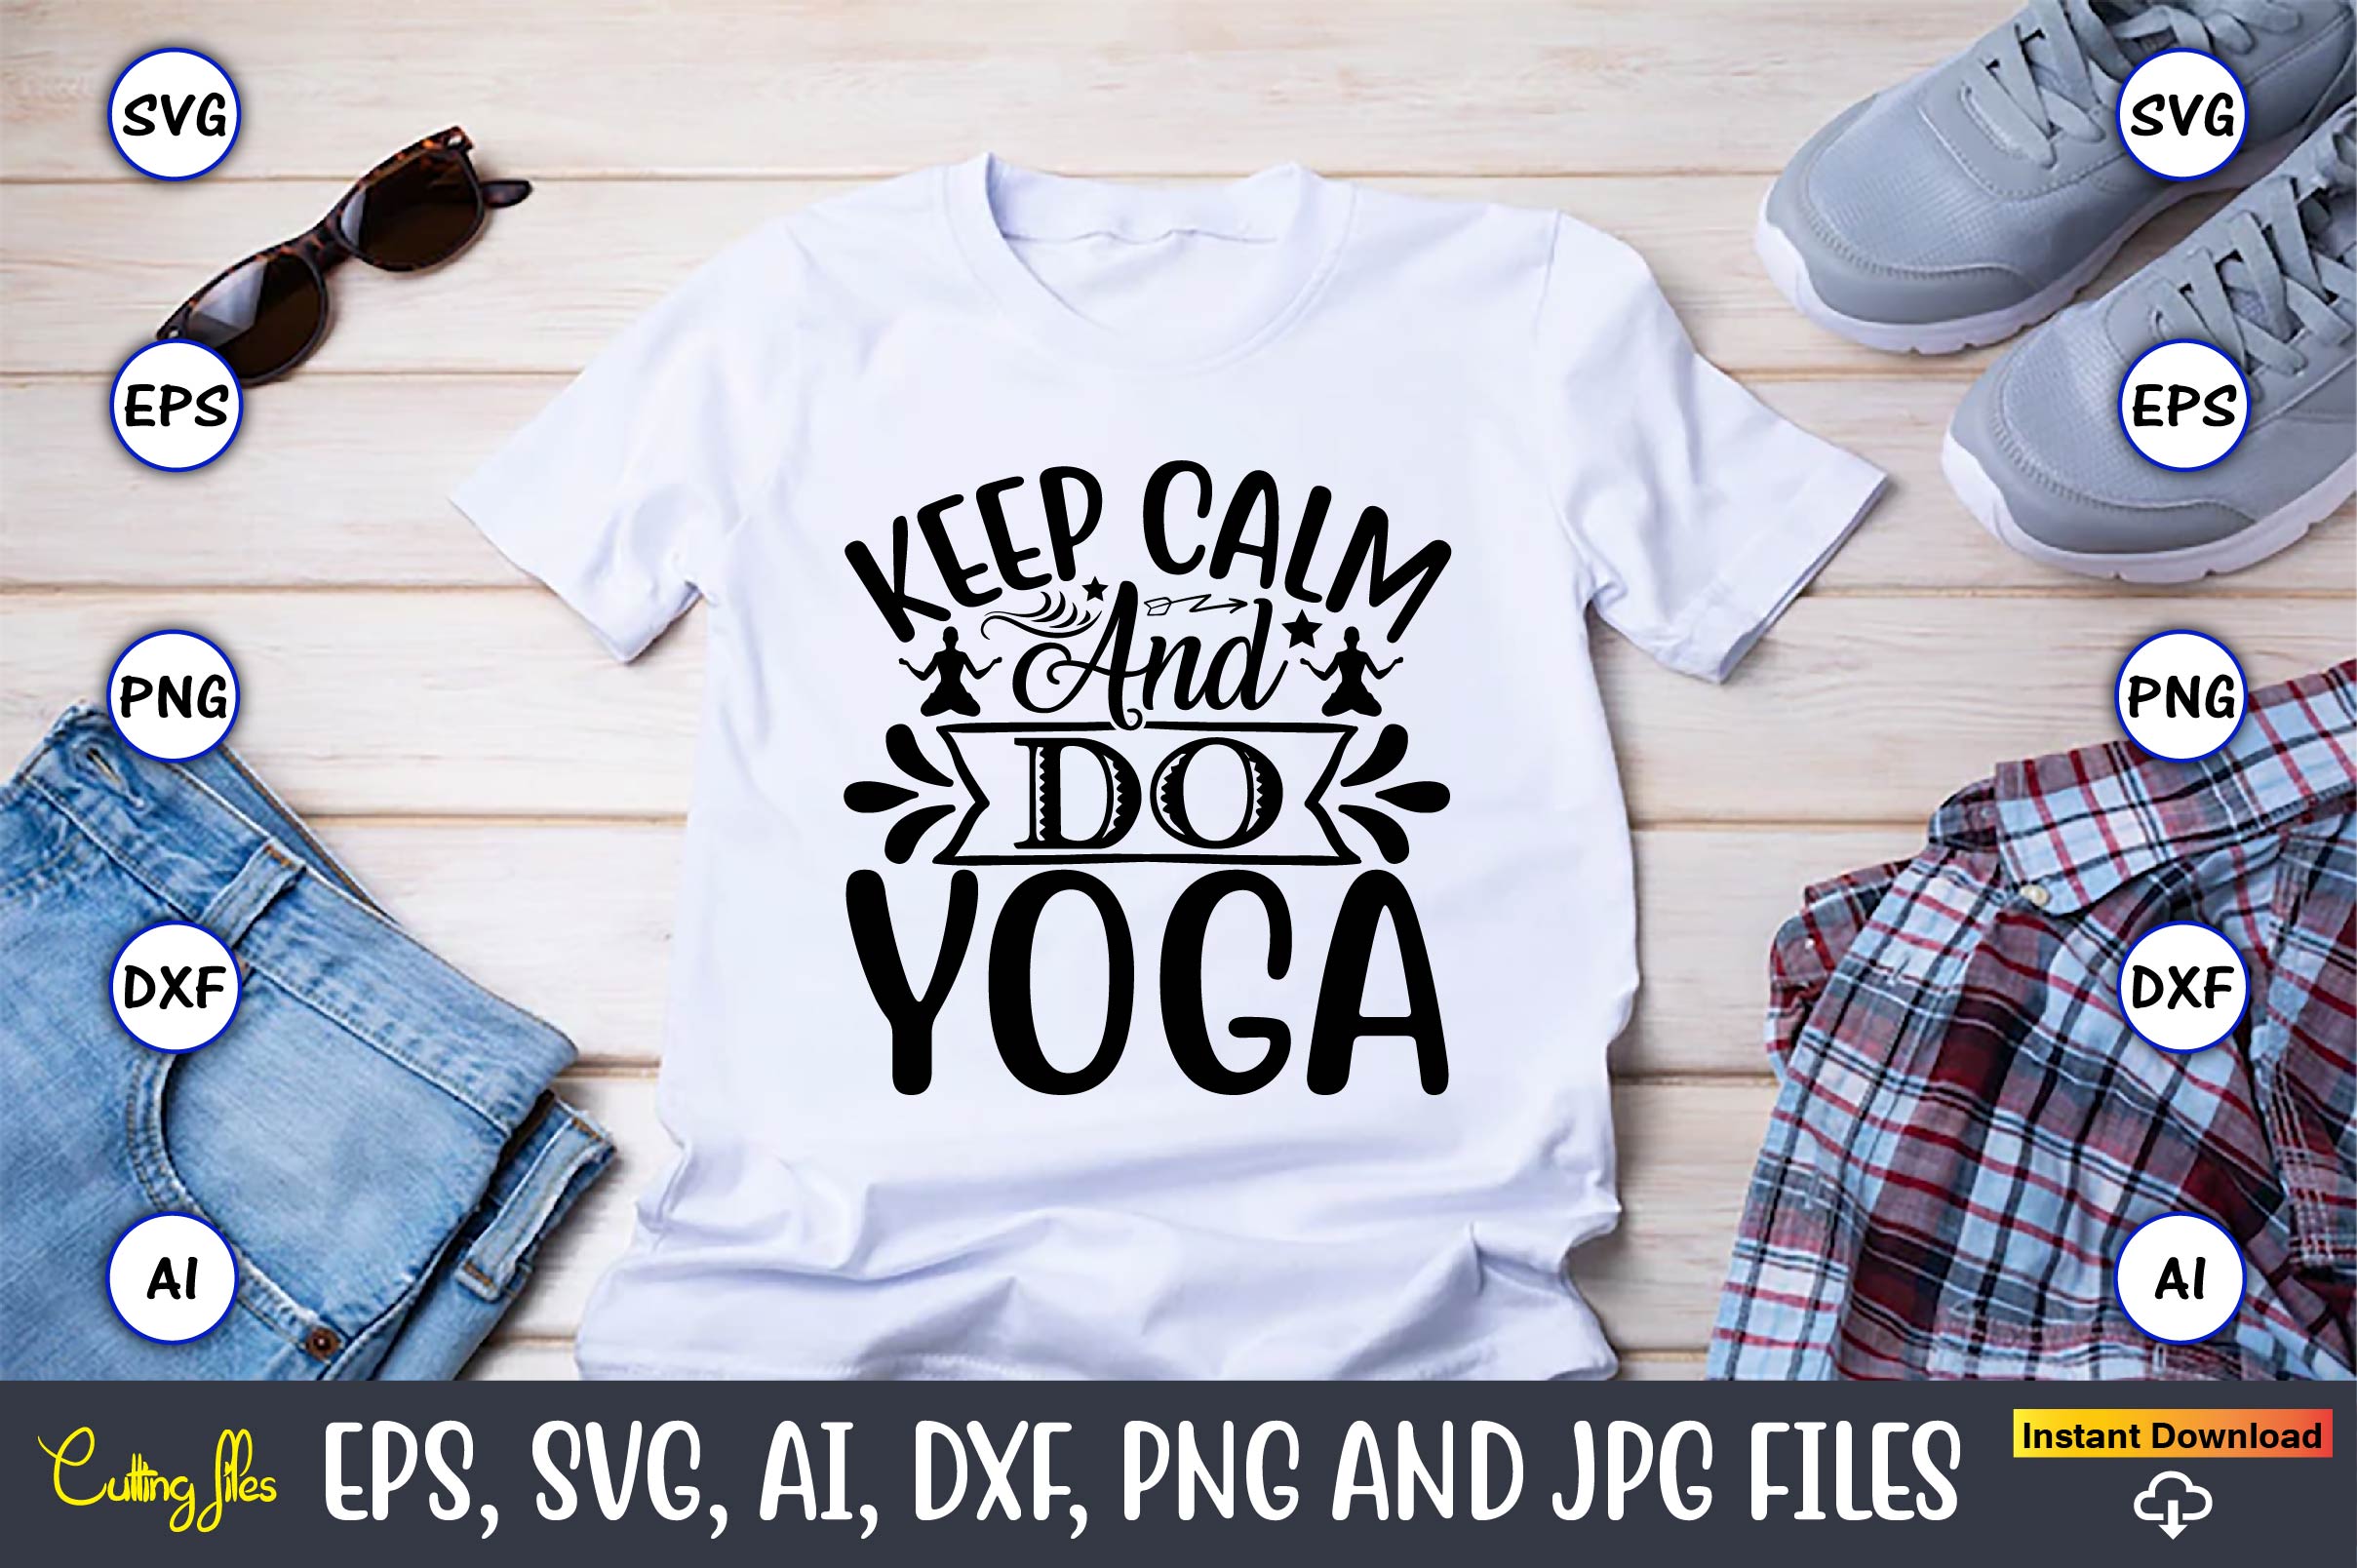 Picture of a white t-shirt with an amazing slogan Keep calm and do yoga.